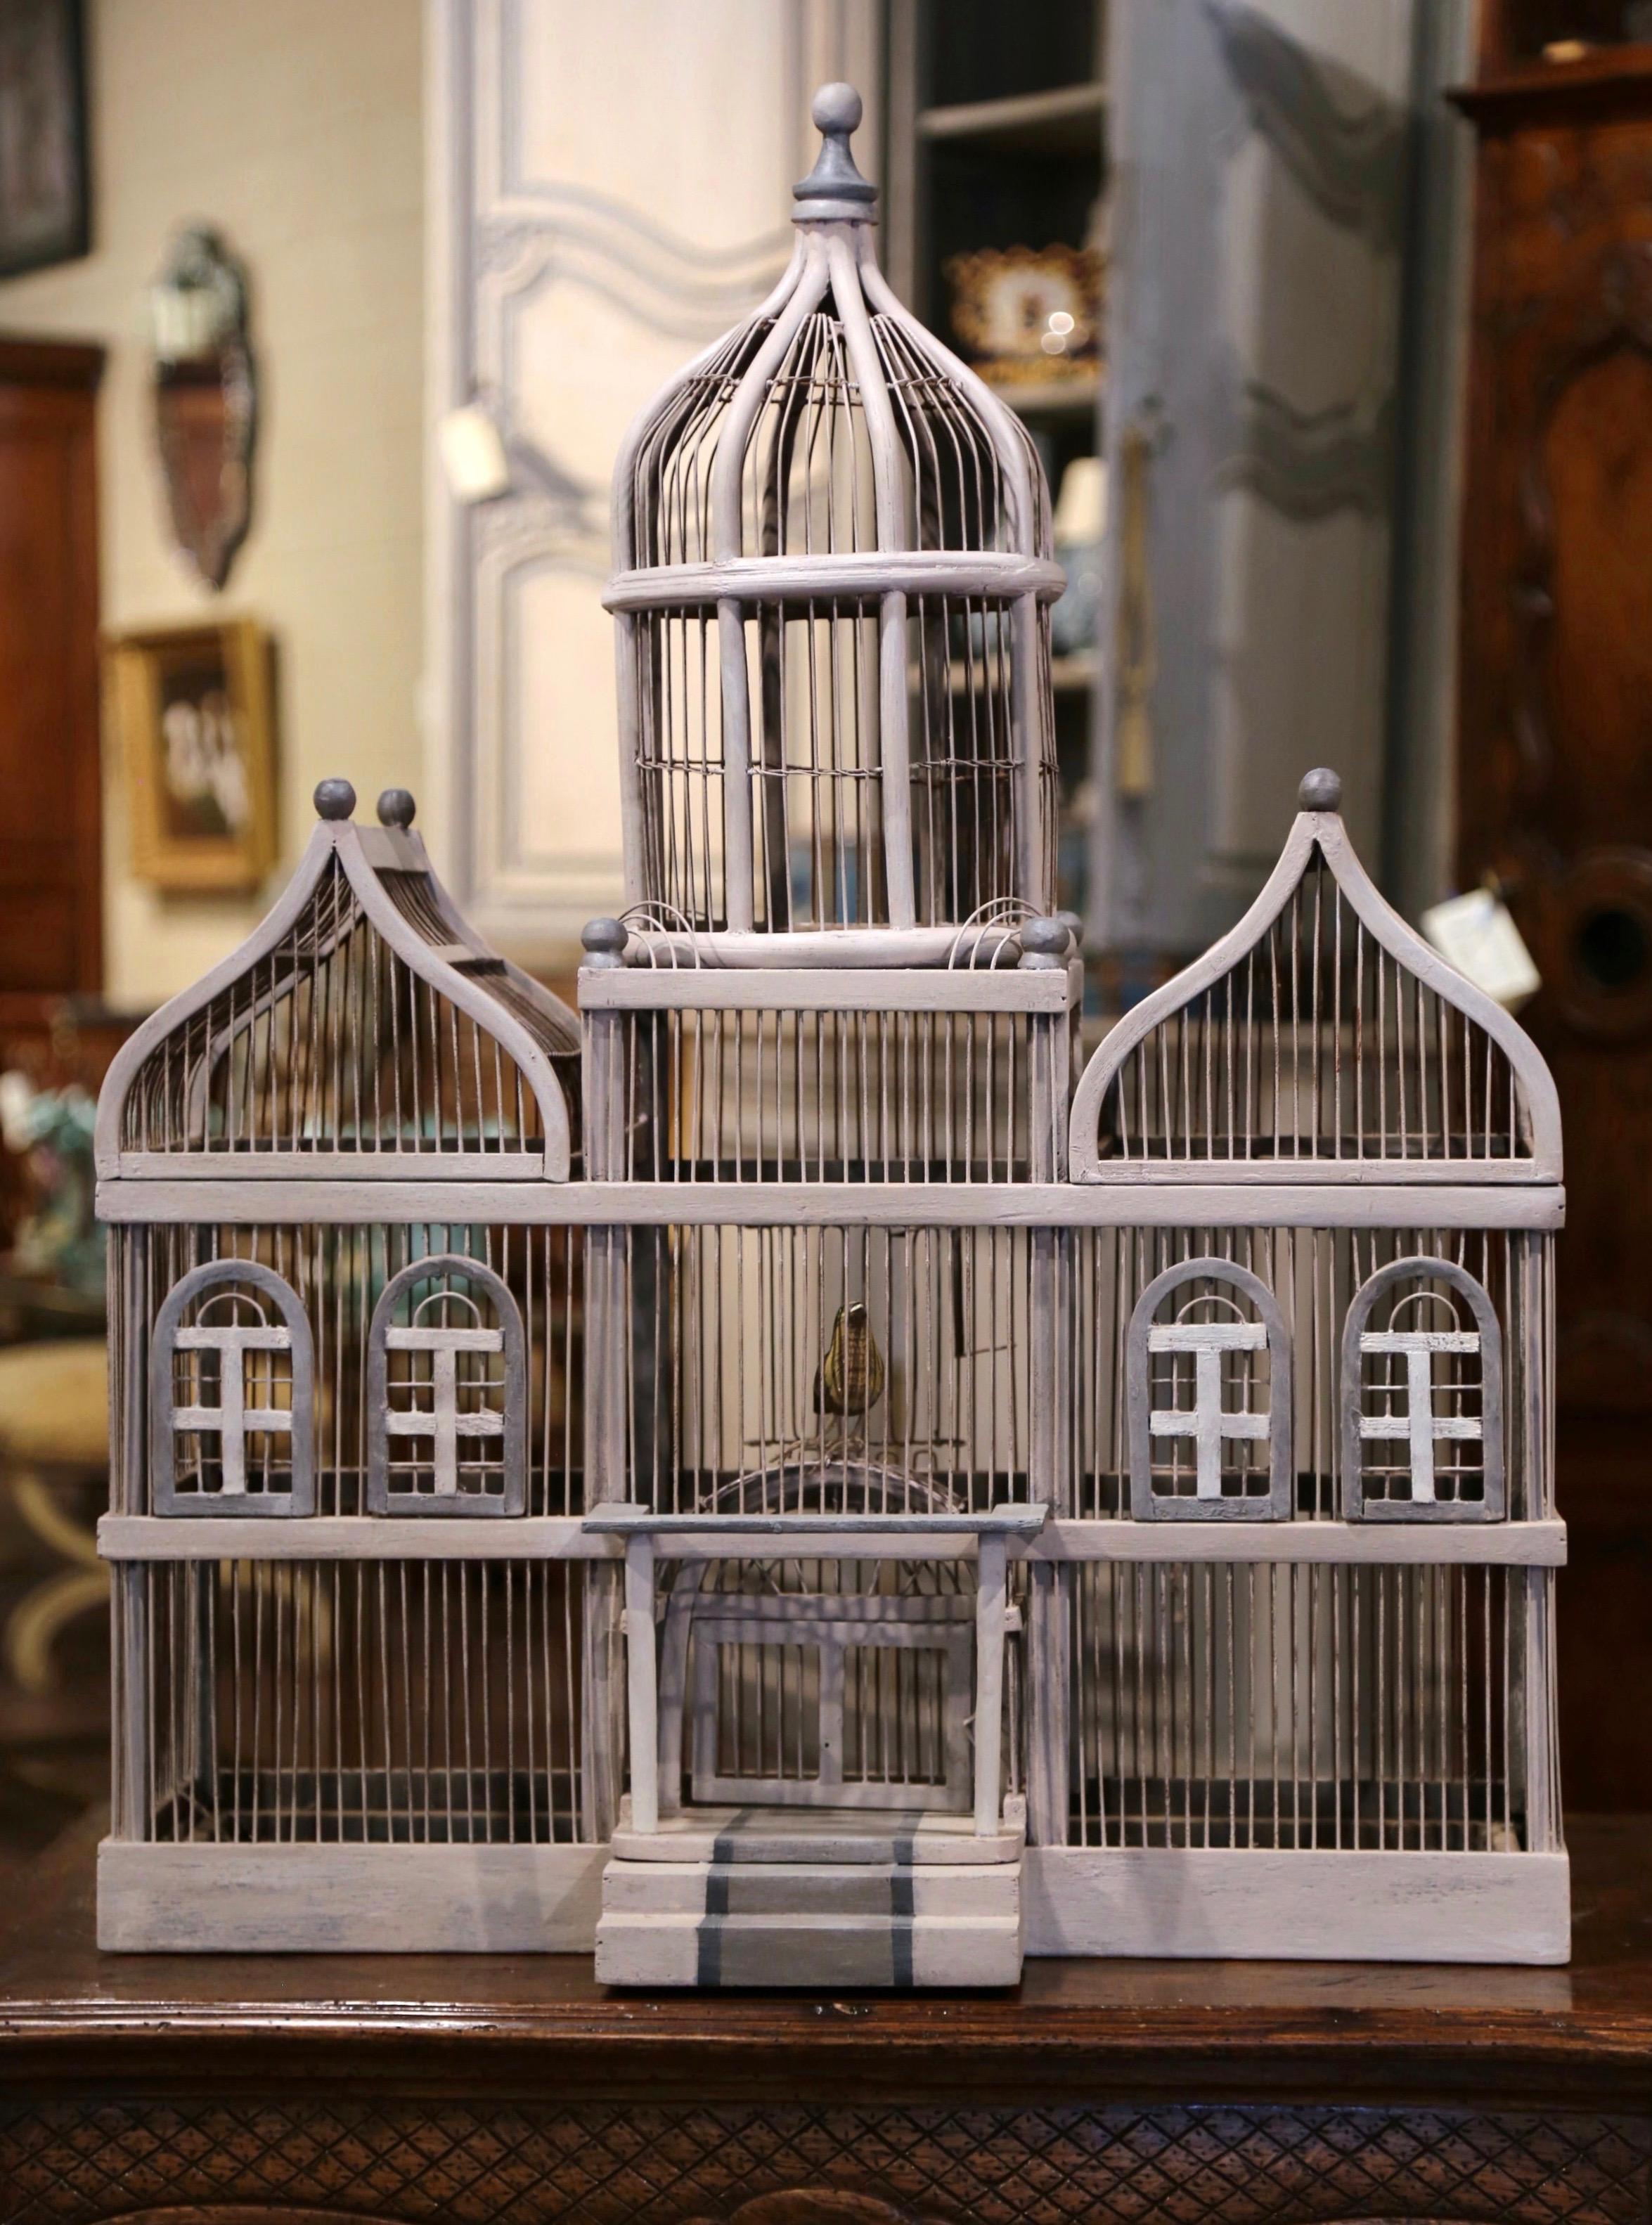 Bring the outdoors in with this large, elegant, antique birdcage. Crafted in France, circa 1920, this hand painted cage features three roofs including a central rounded dome embellished with a decorative finial at the pediment. The entire cage is